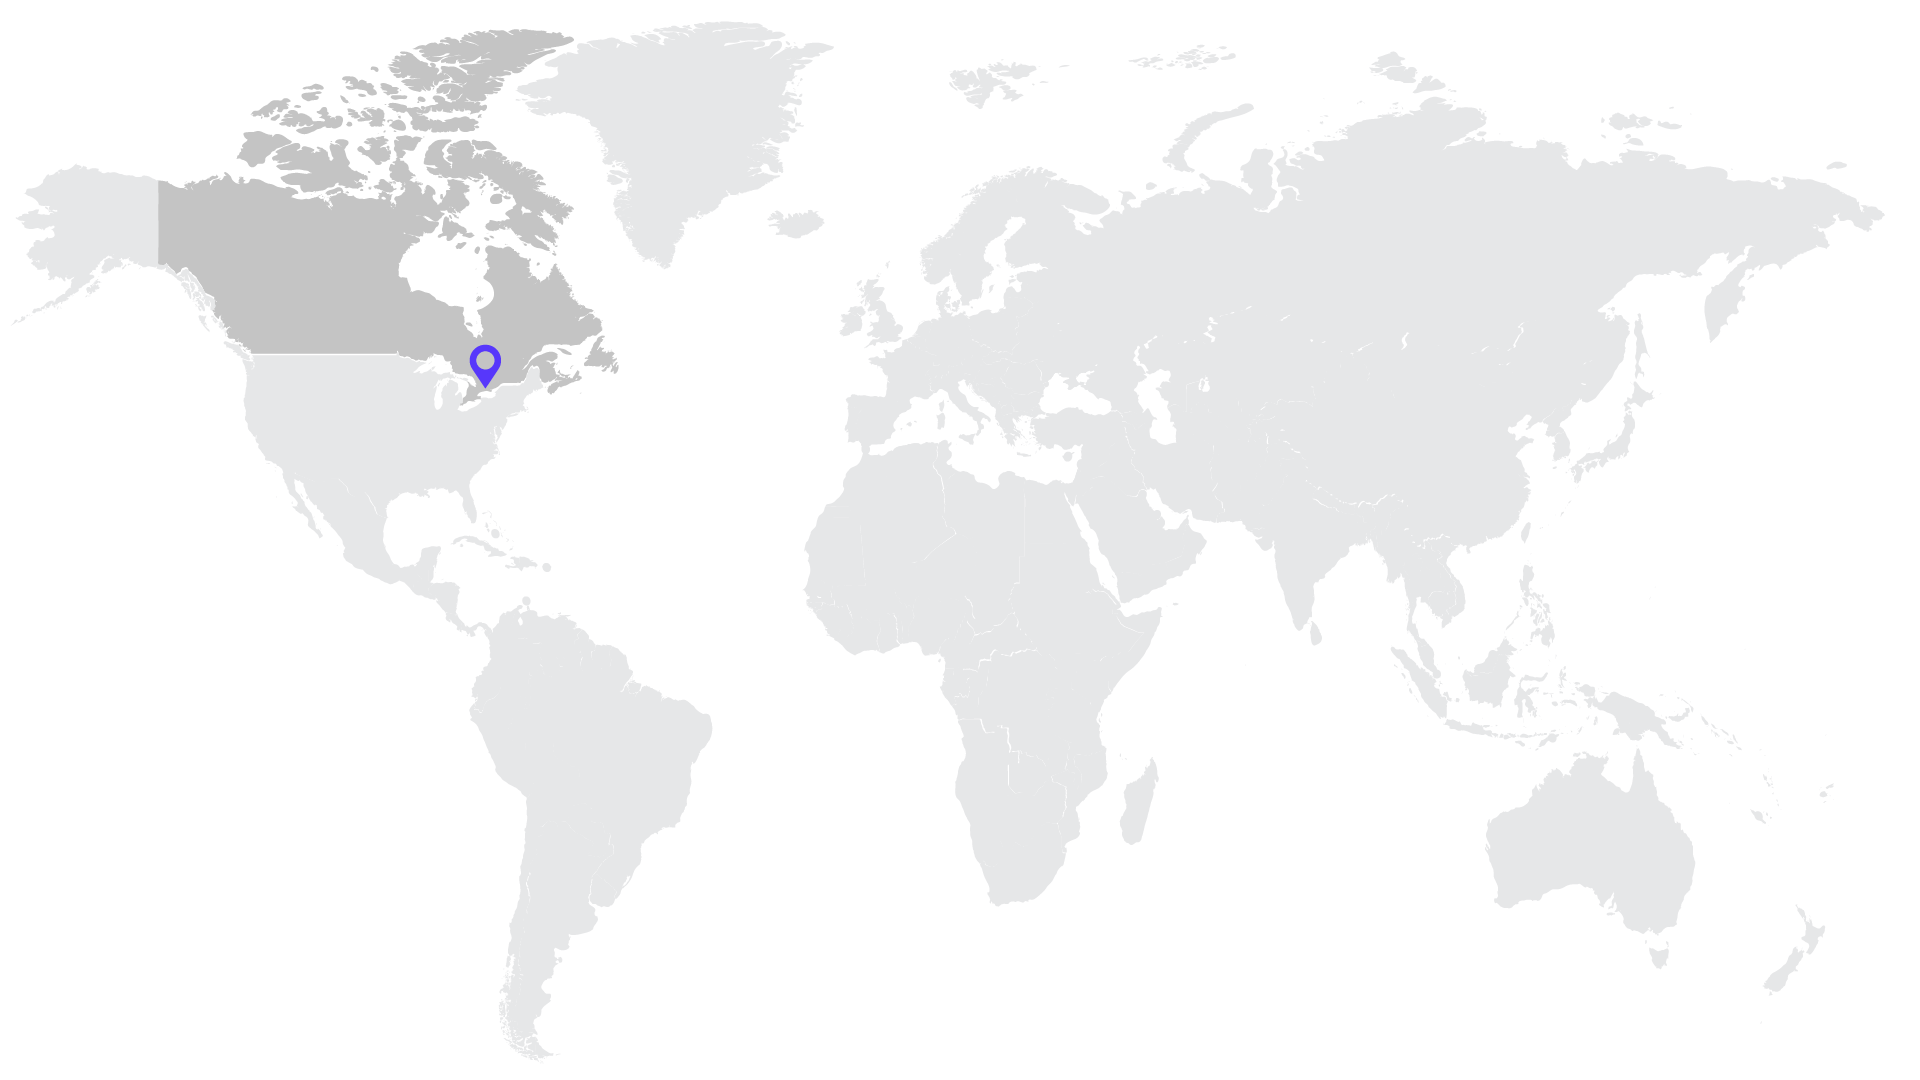 Image of a World Map